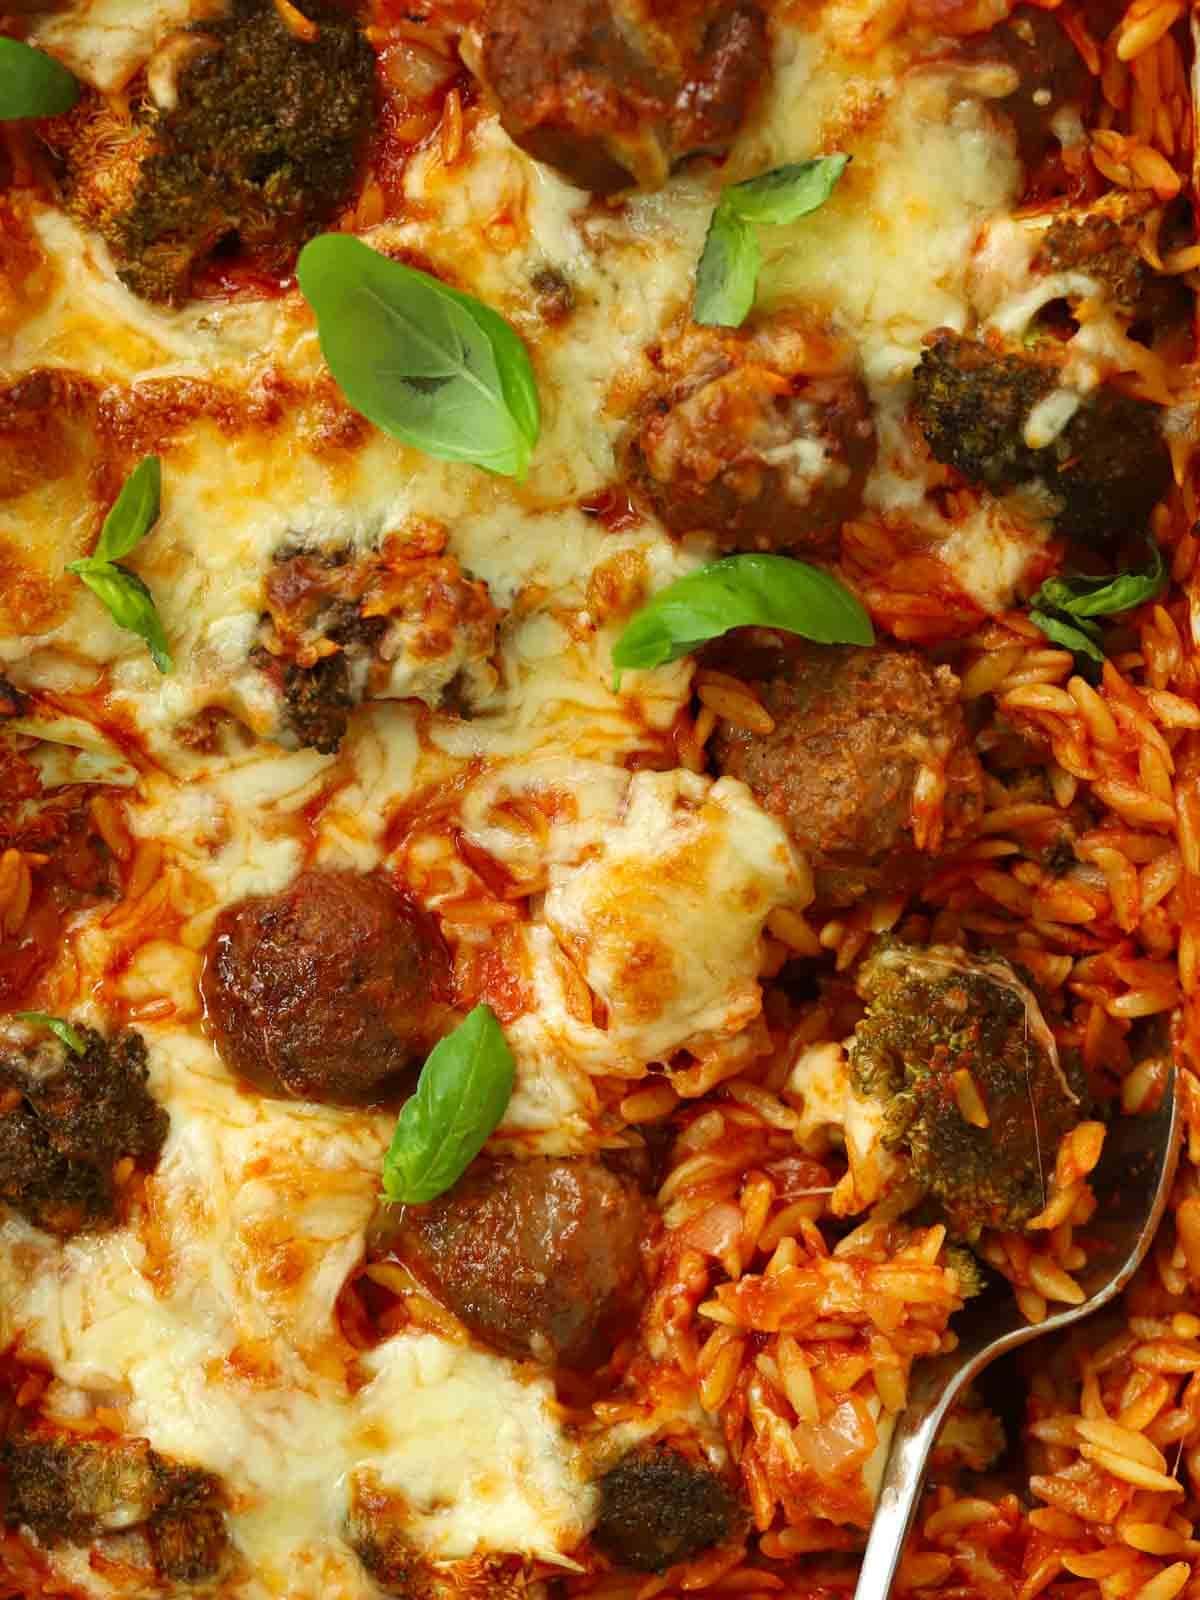 A close up of meatballs, orzo and cheese, cooked in one dish together in the oven. A spoon is showing, ready to serve.